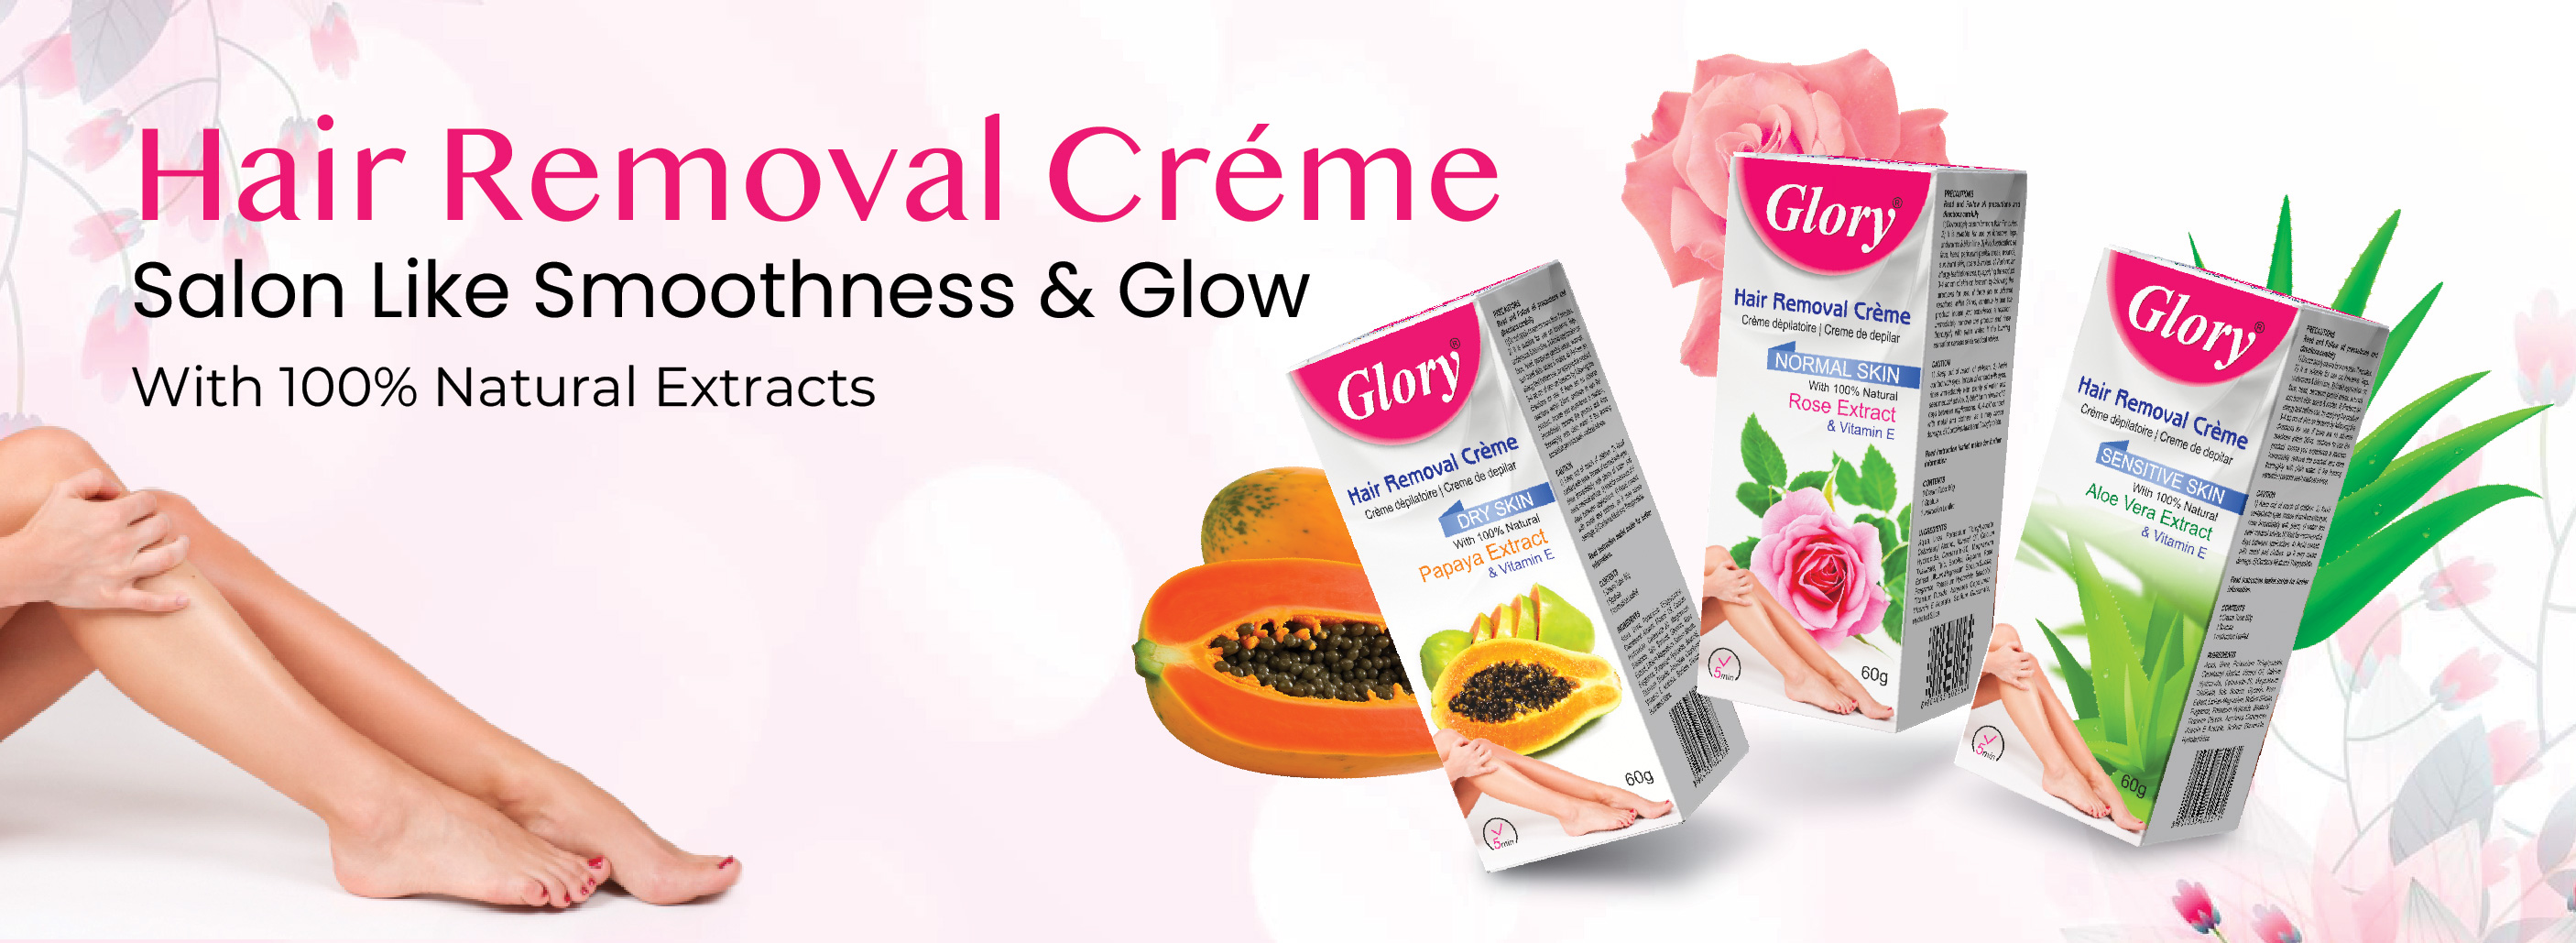 Hair Removal Creme Manufacturer | Hair Removal Creme Manufacturer in Malaysia